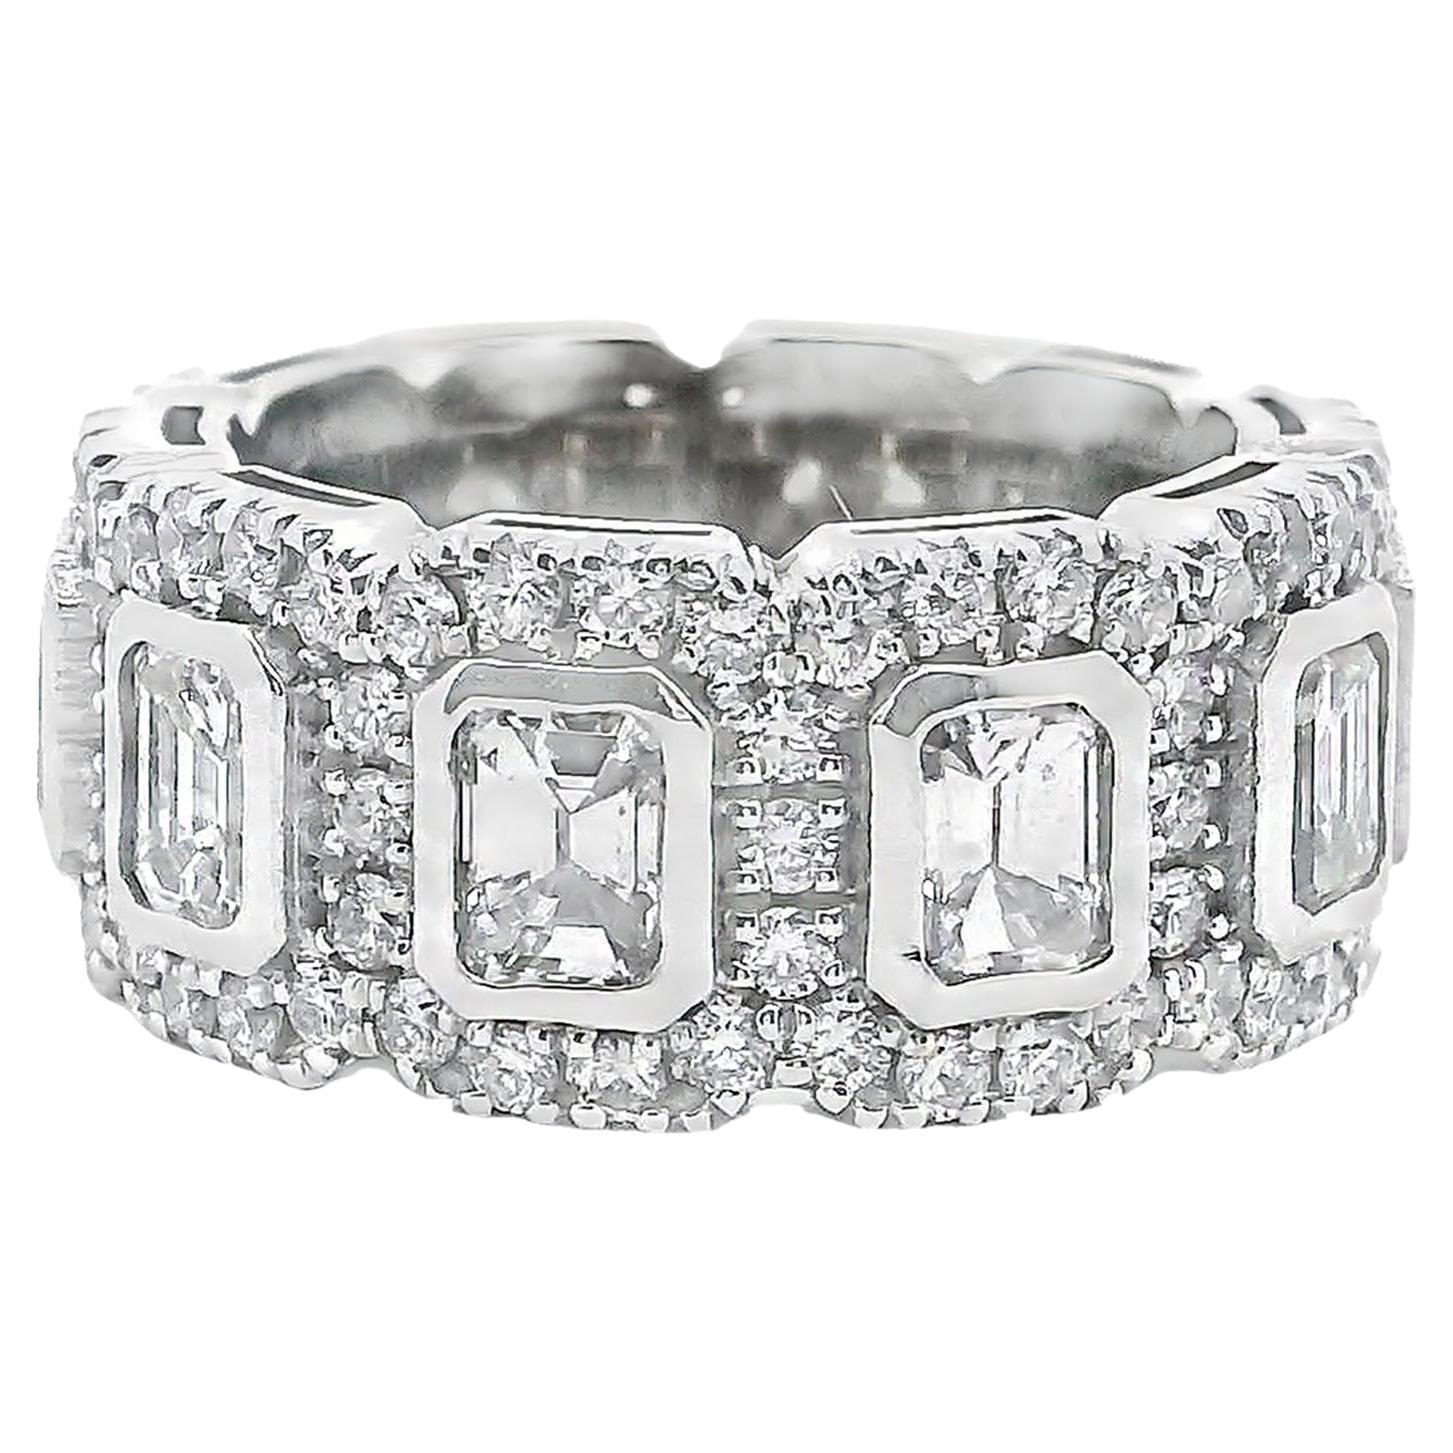 14K White Gold Eternity Ring with Round and Emerald Cut Diamonds